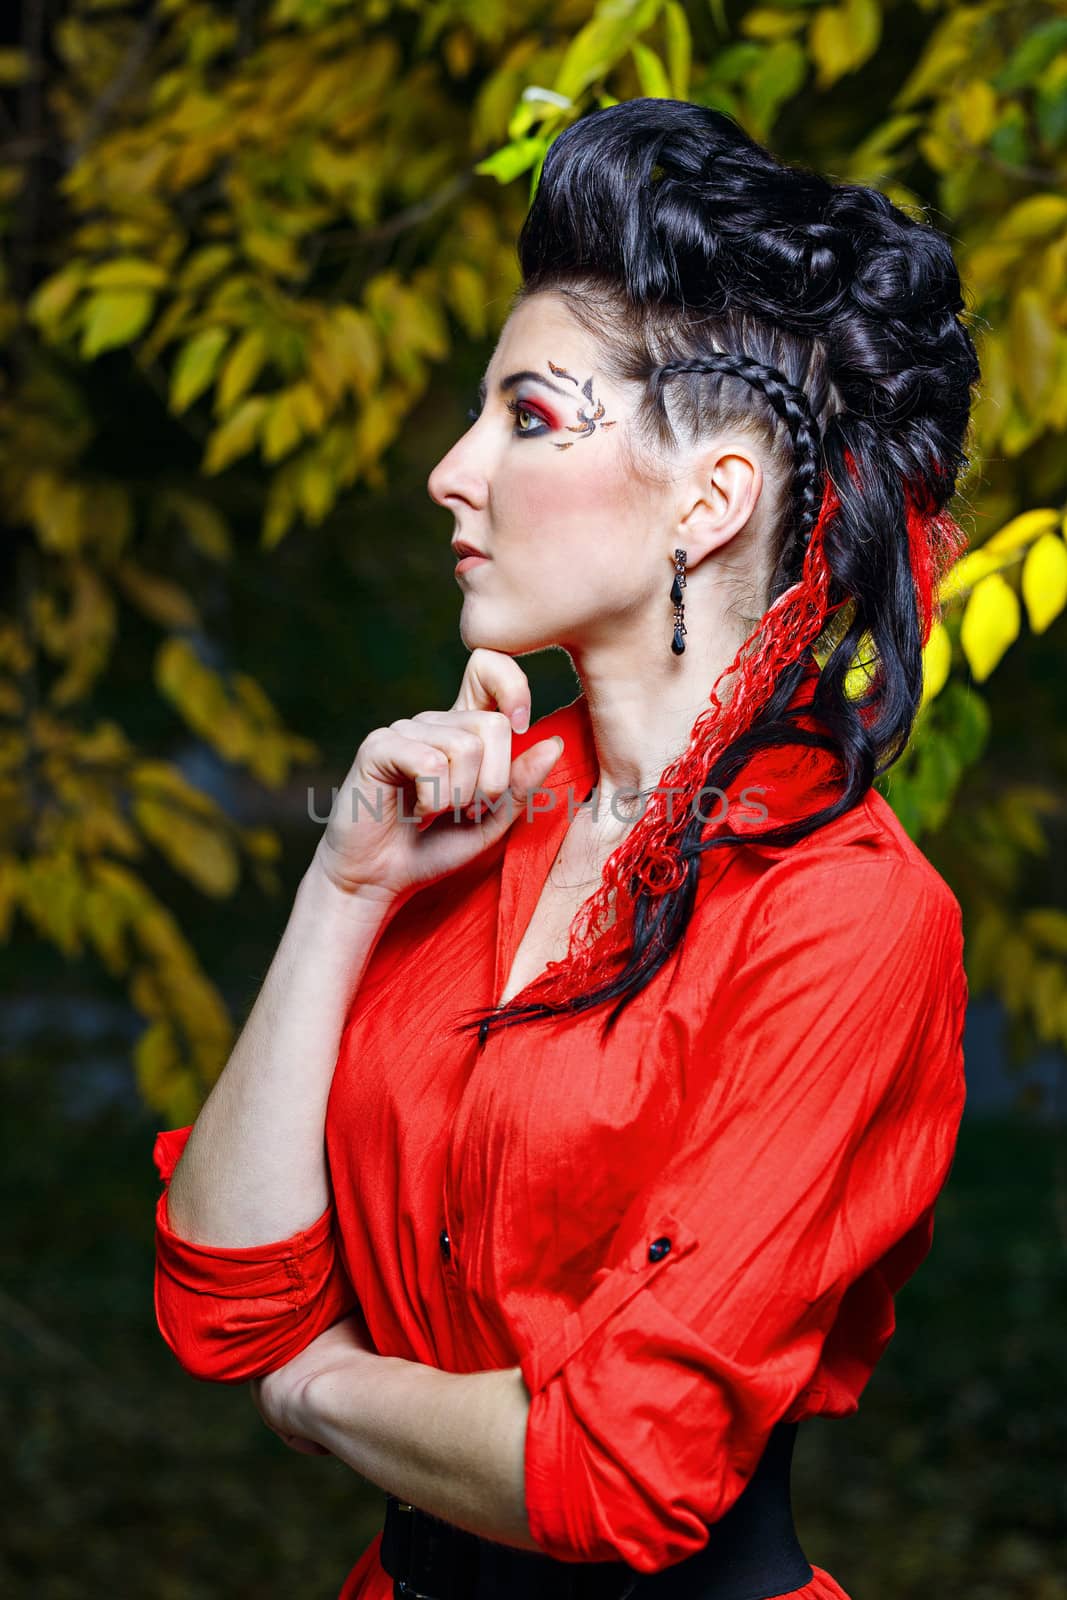 Young attractive girl in red shirt and with makeup close-up portrait in autumn park